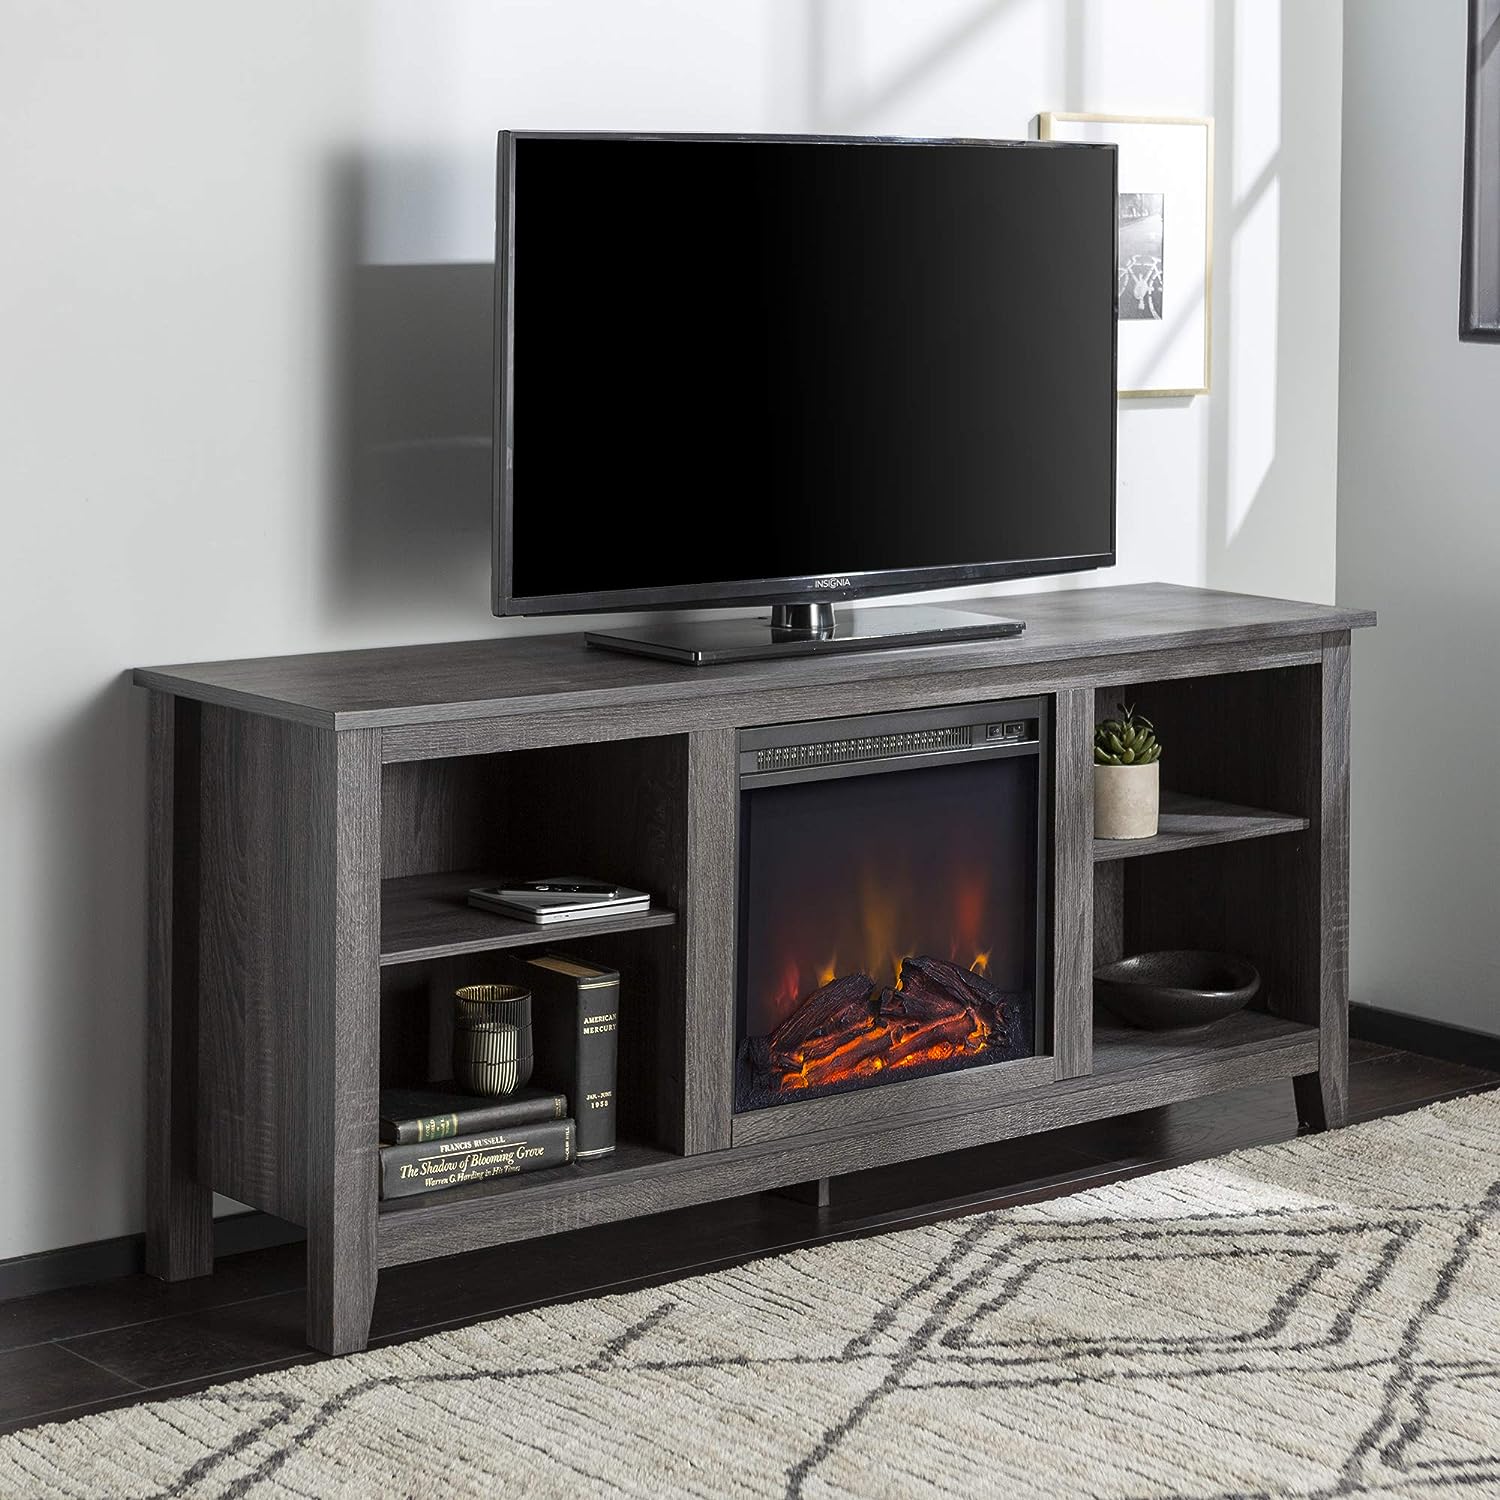 Wall Mount Tv Stand With Fireplace